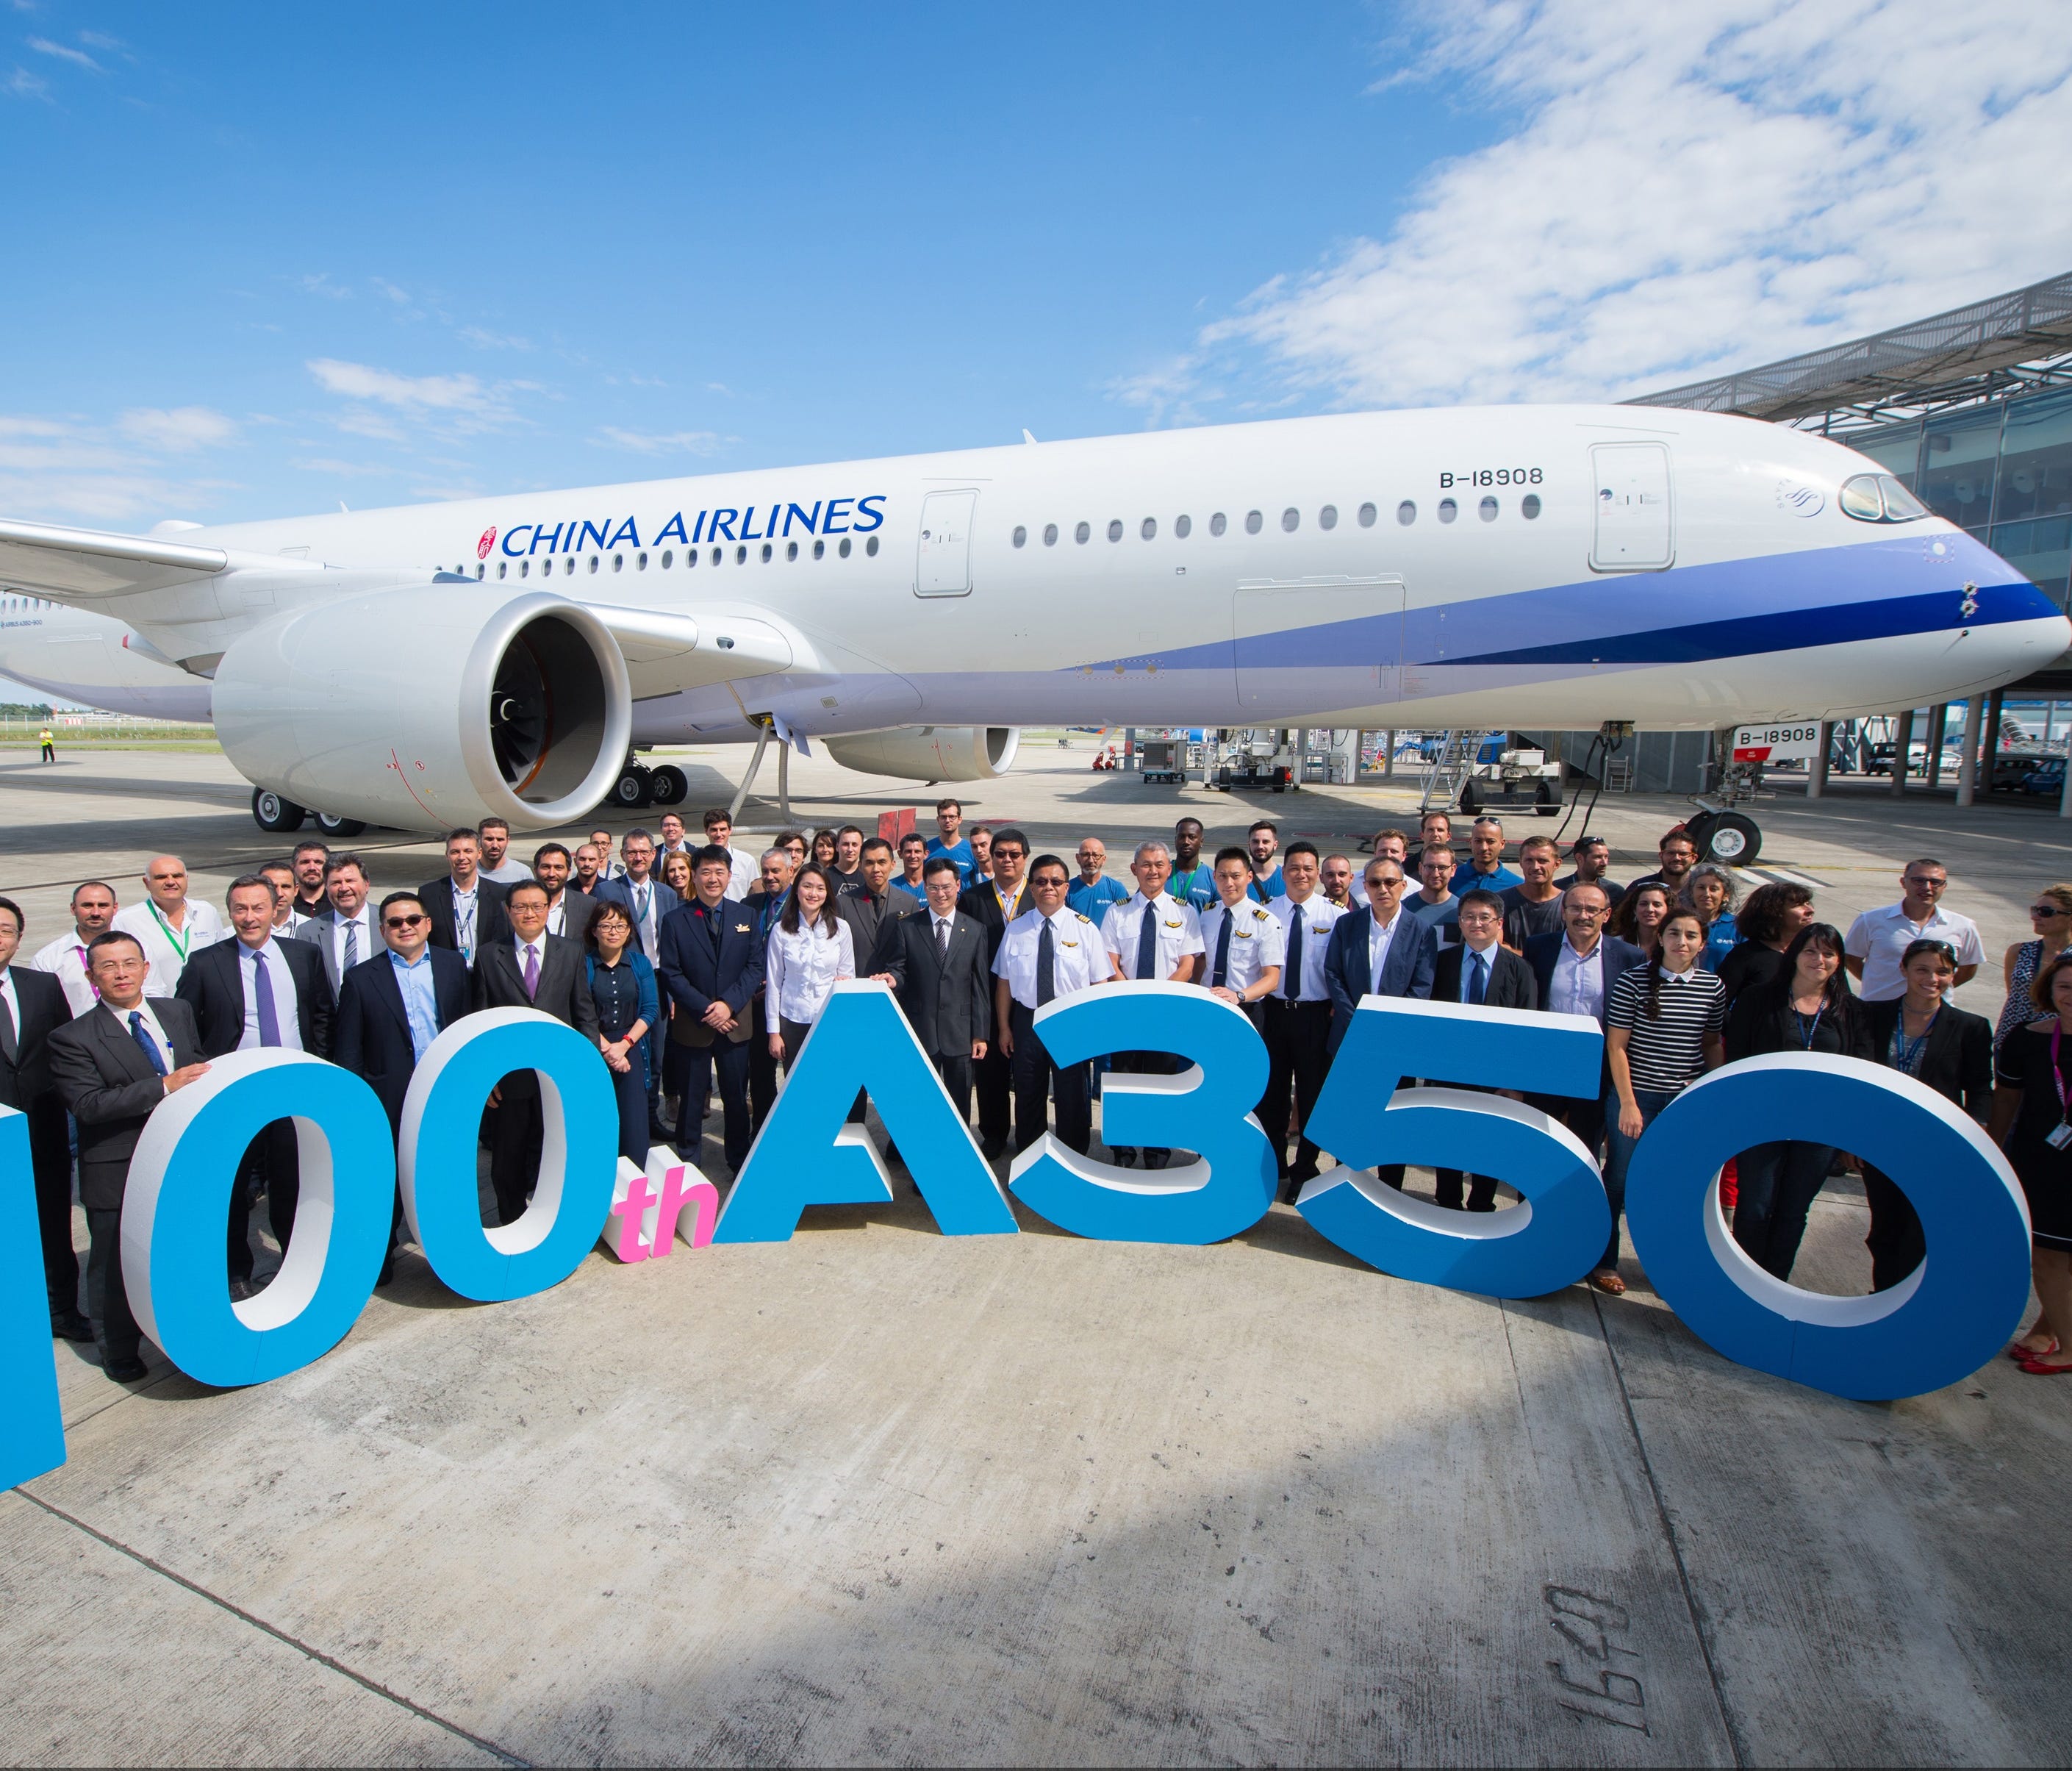 Airbus celebrated the delivery of its 100th A350 at a delivery ceremony in Toulouse, France, on July 26, 2017. The milestone aircraft went to customer China Airlines.